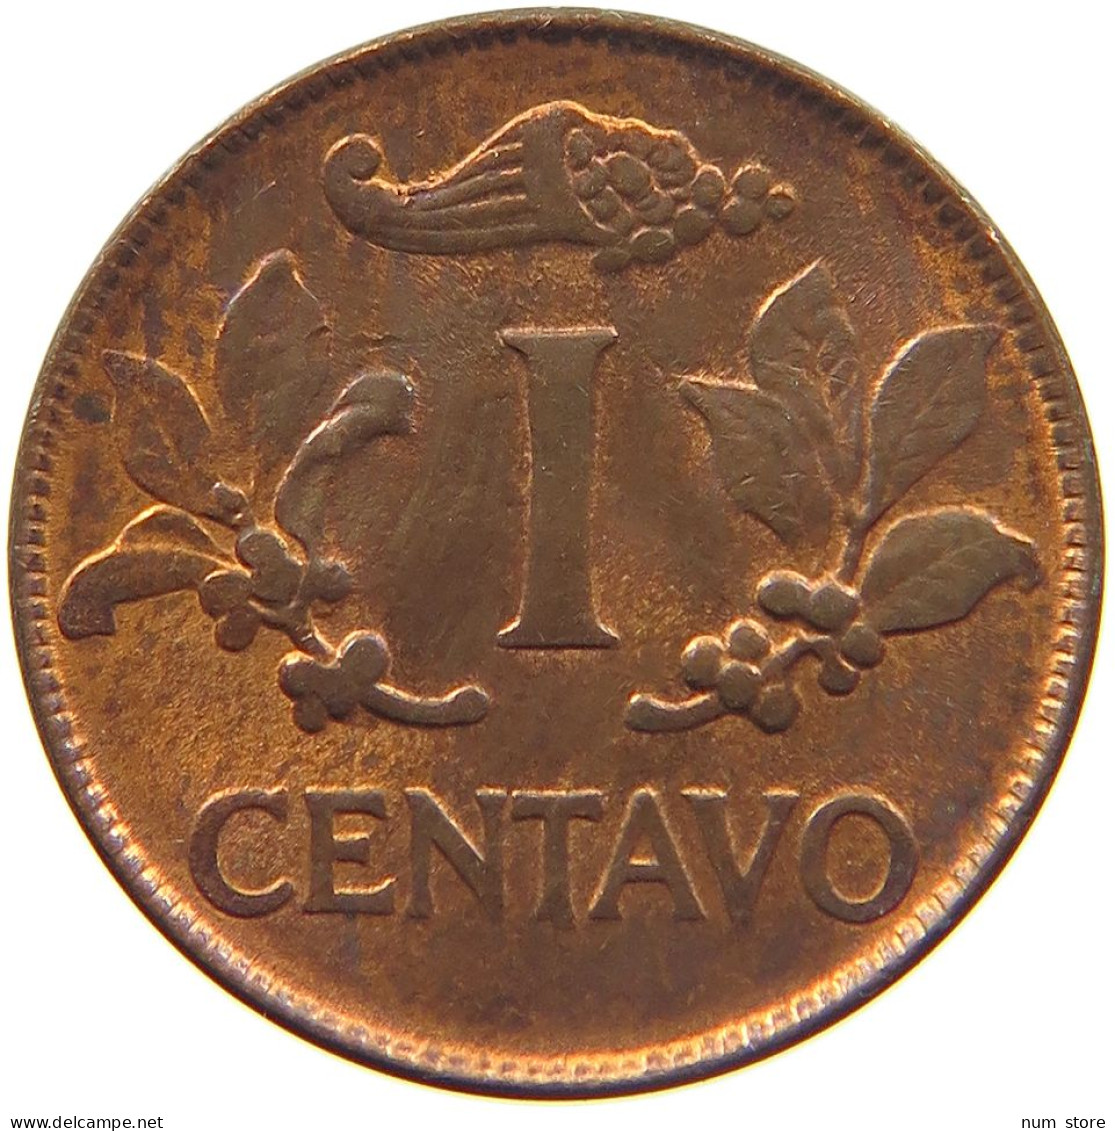 COLOMBIA CENTAVO 1969 MINTING ERROR DOUBLE STRUCK 9 #MA 025449 - Colombia